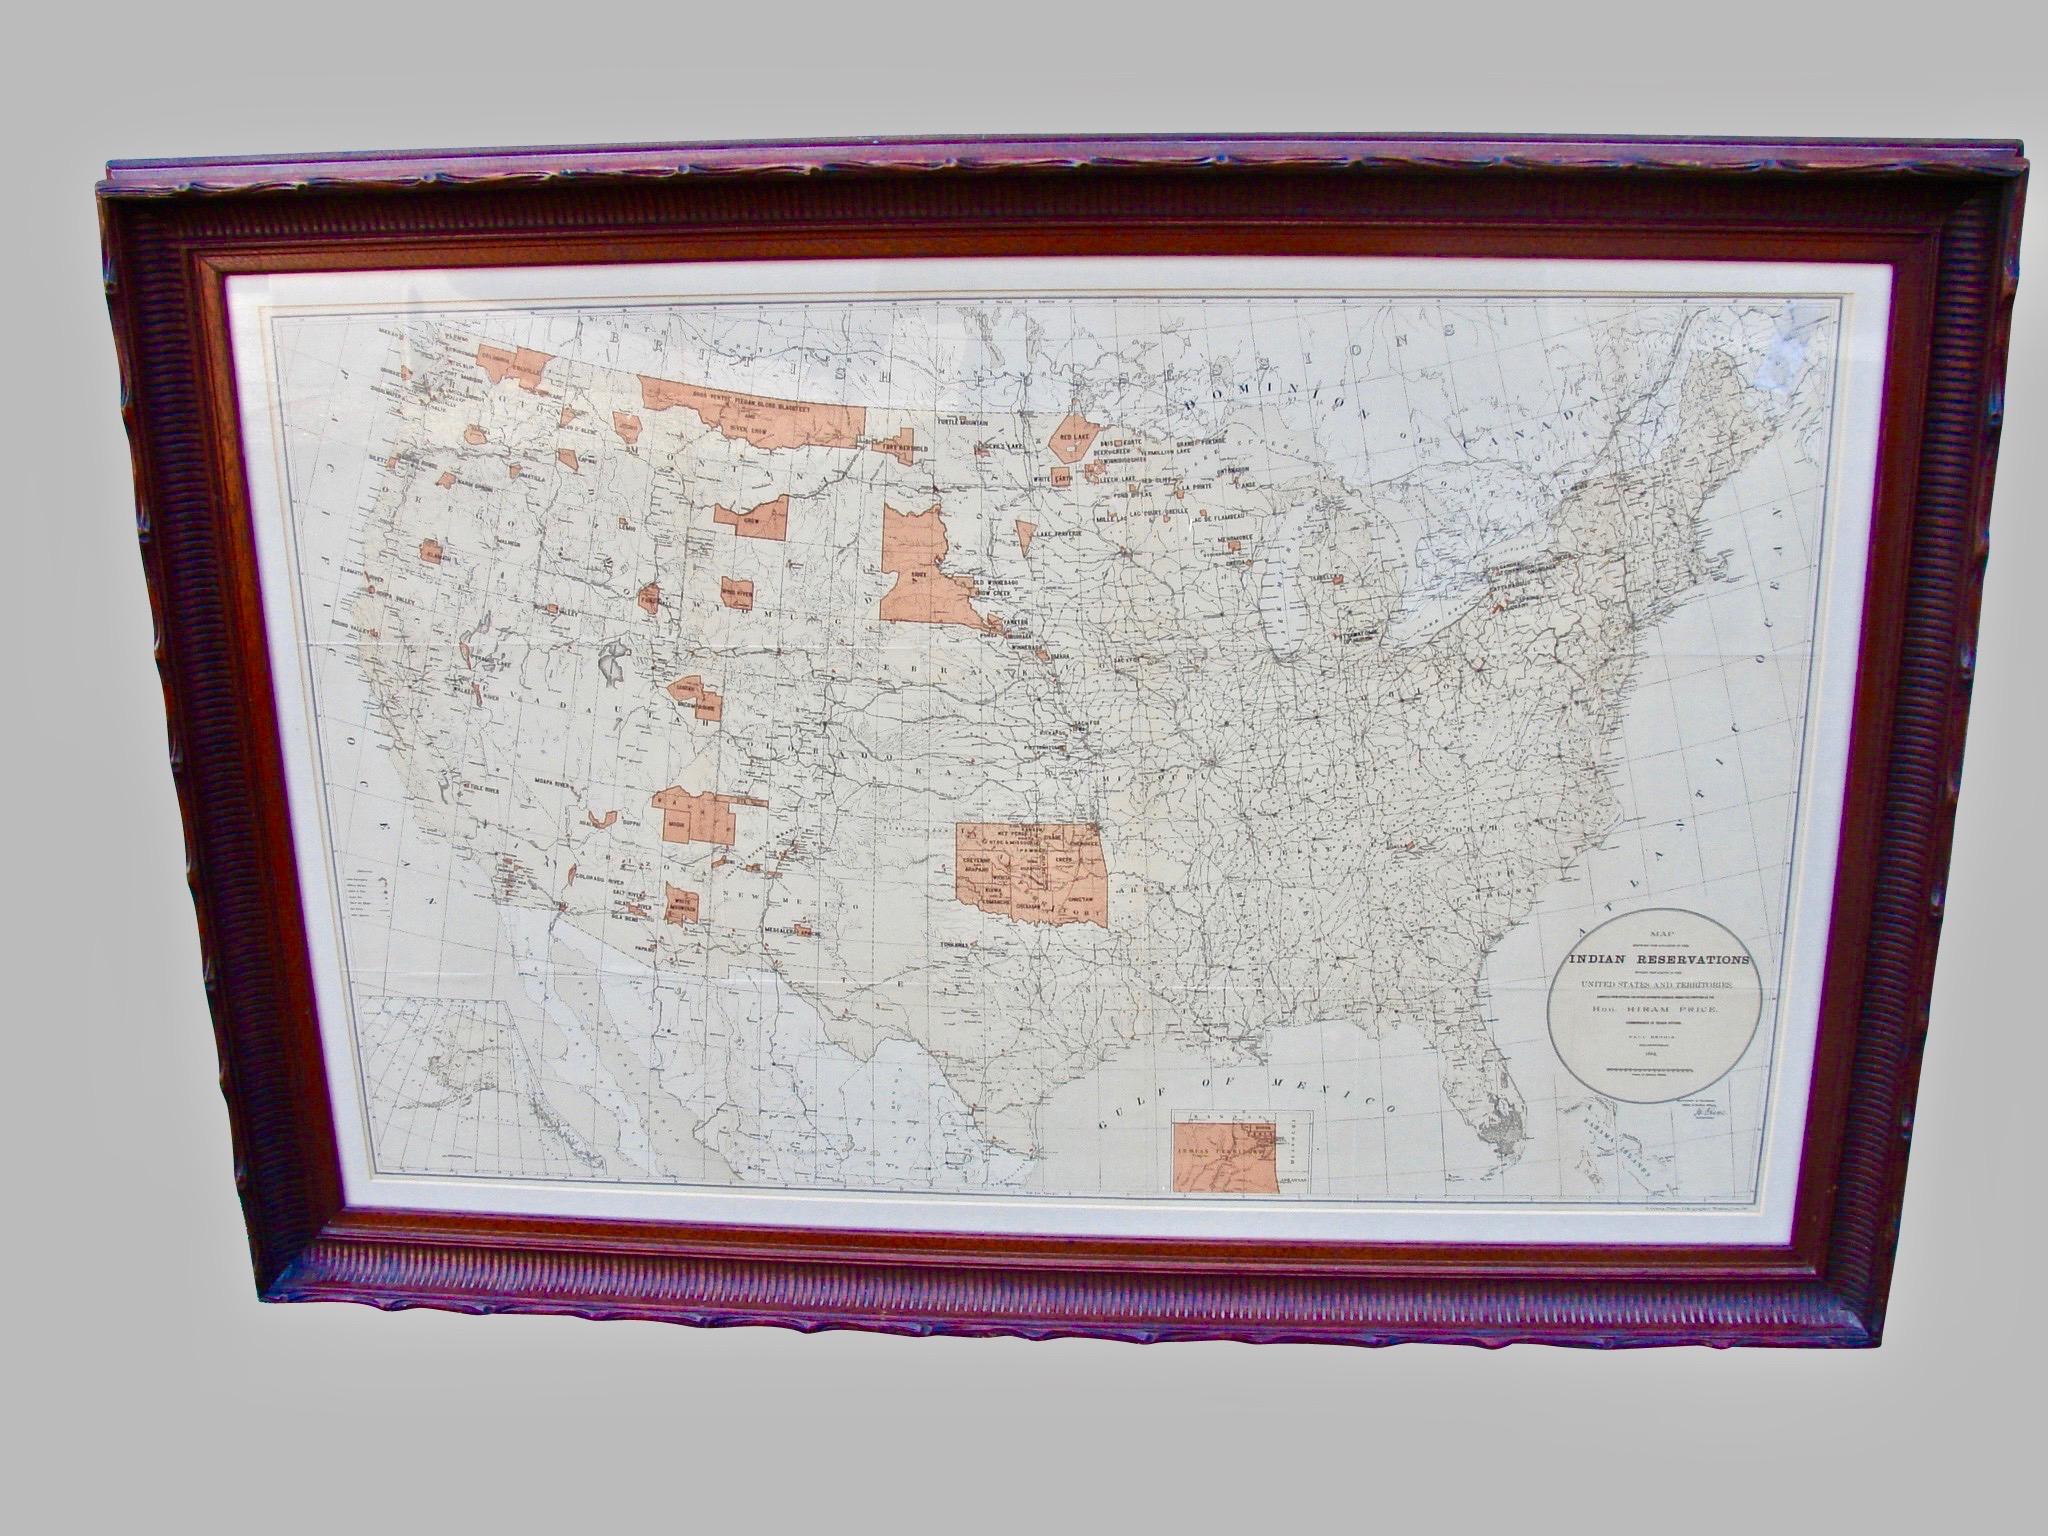 Washington: Department of the Interior. This interesting 1884 map presents the Indian Reservations in the United States and its territories covering the entire United States with Alaska as an inset in the lower left. Another inset shows the Indian